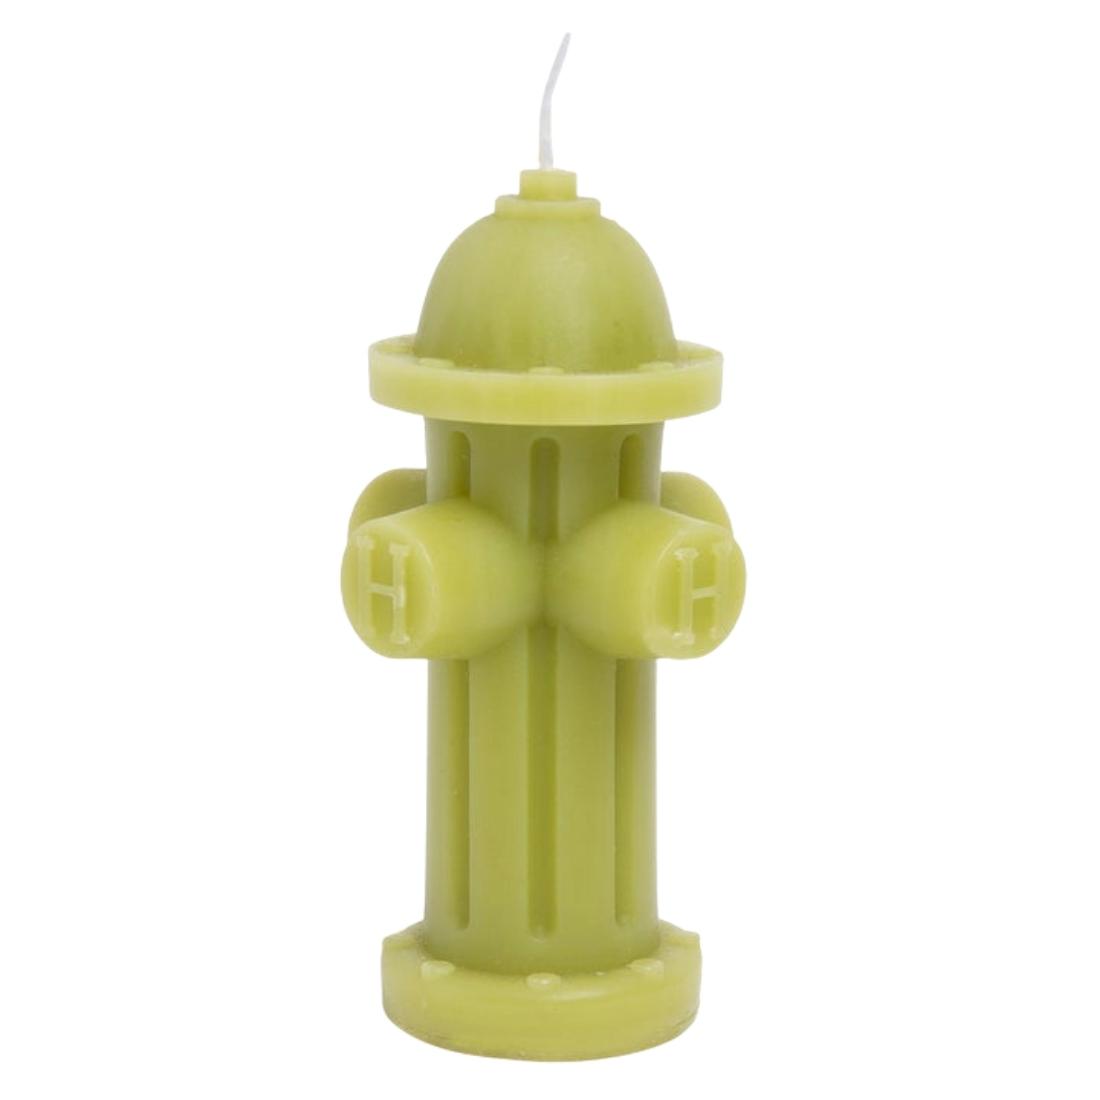 Huf Hydrant Candle - Huf Green - Gifts for Skateboarders by Huf